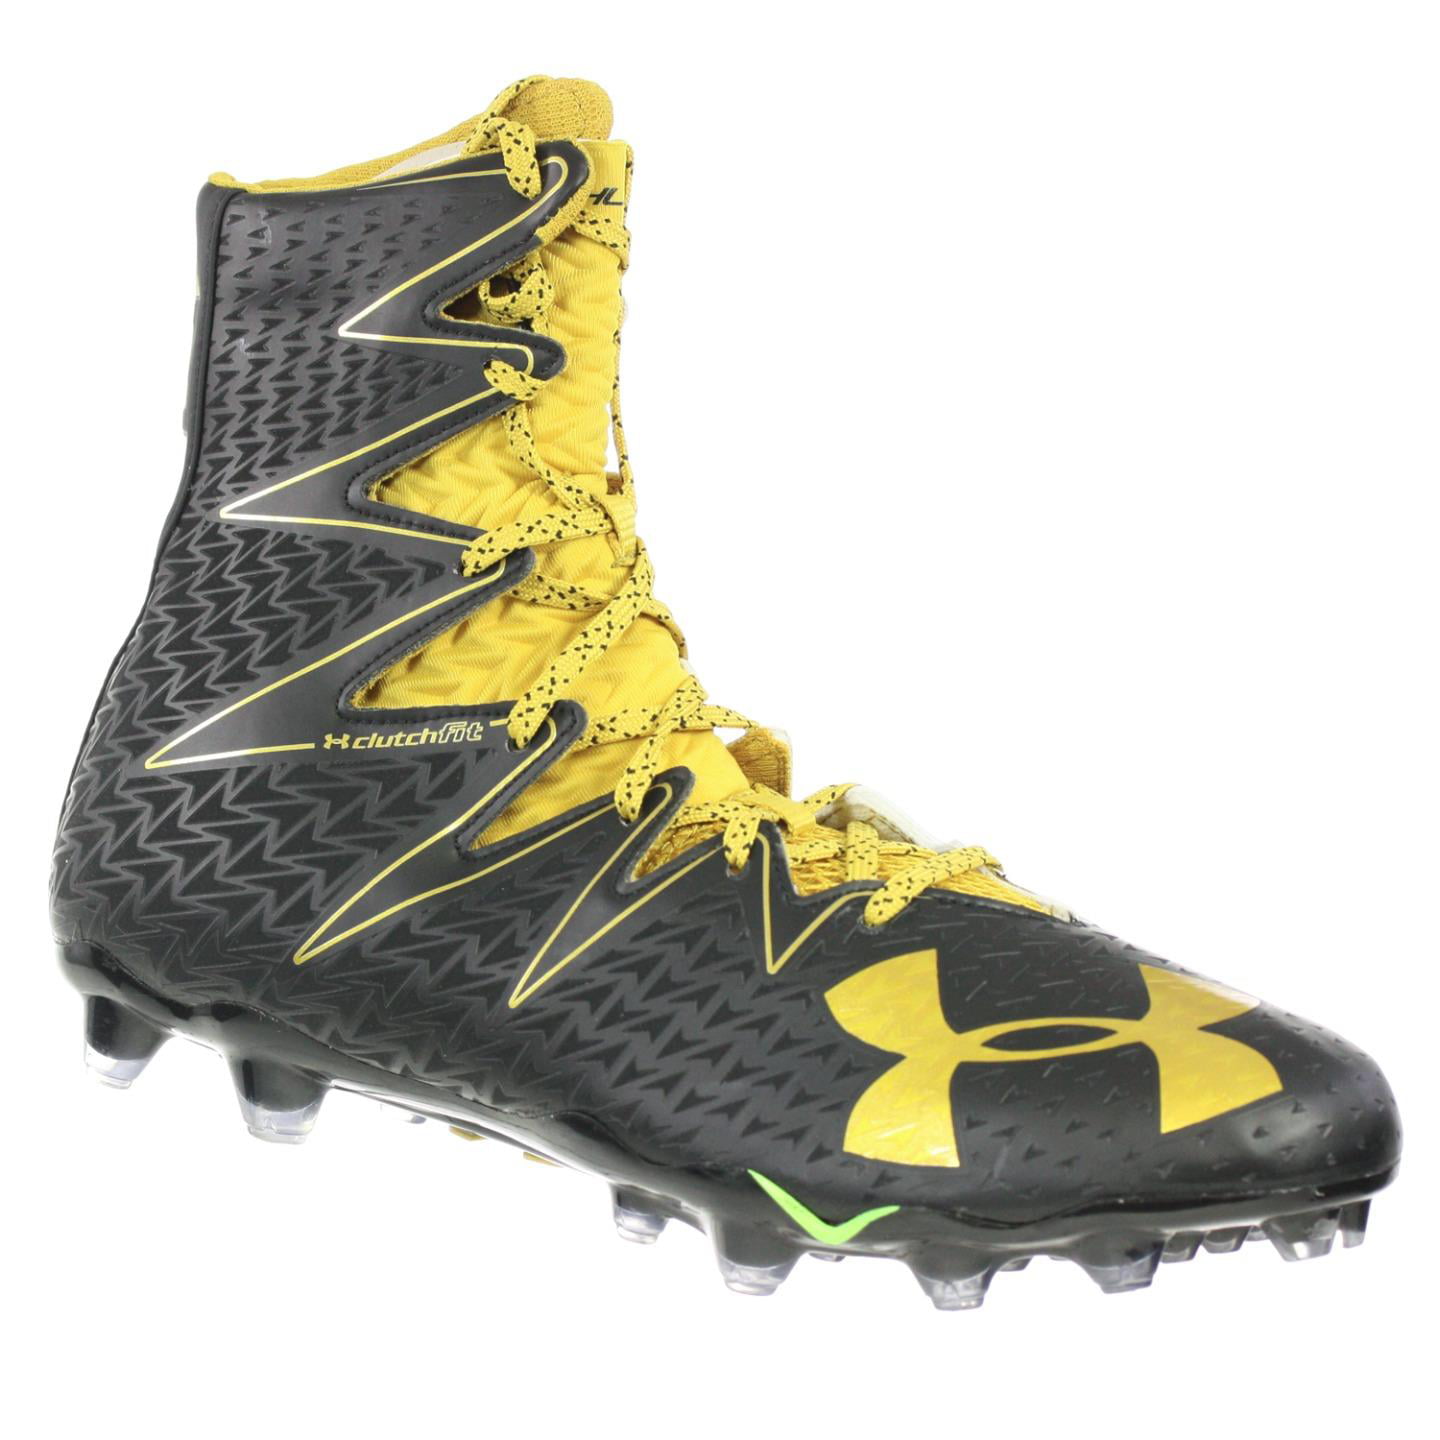 gold and black under armour cleats